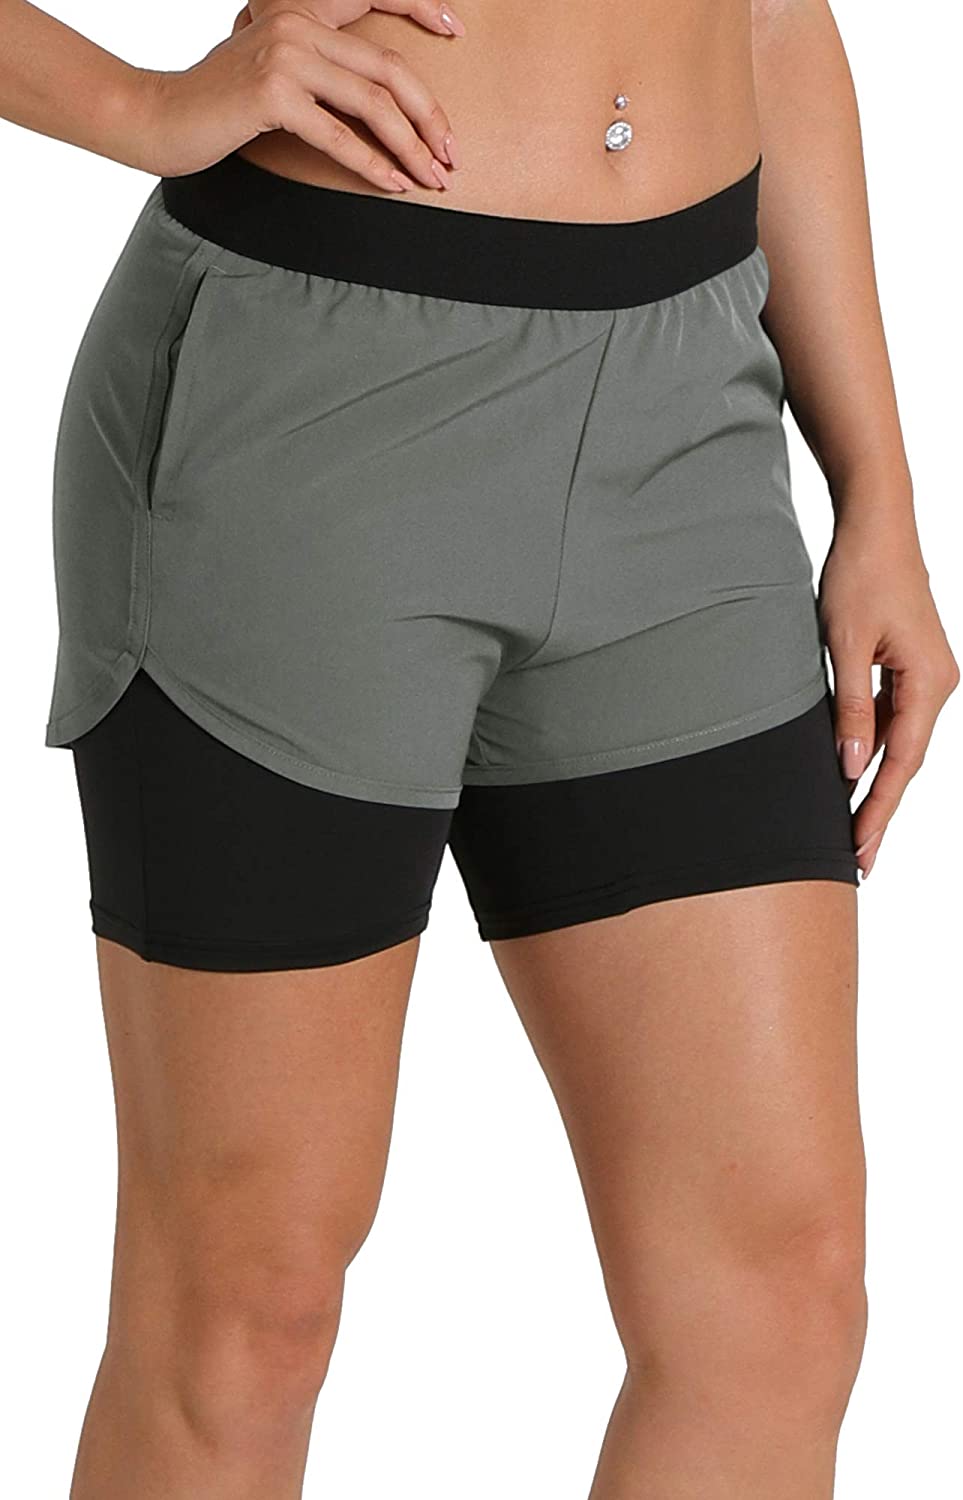 icyzone Running Workout Shorts for Women Gym Yoga Exercise Athletic Shorts with Pockets